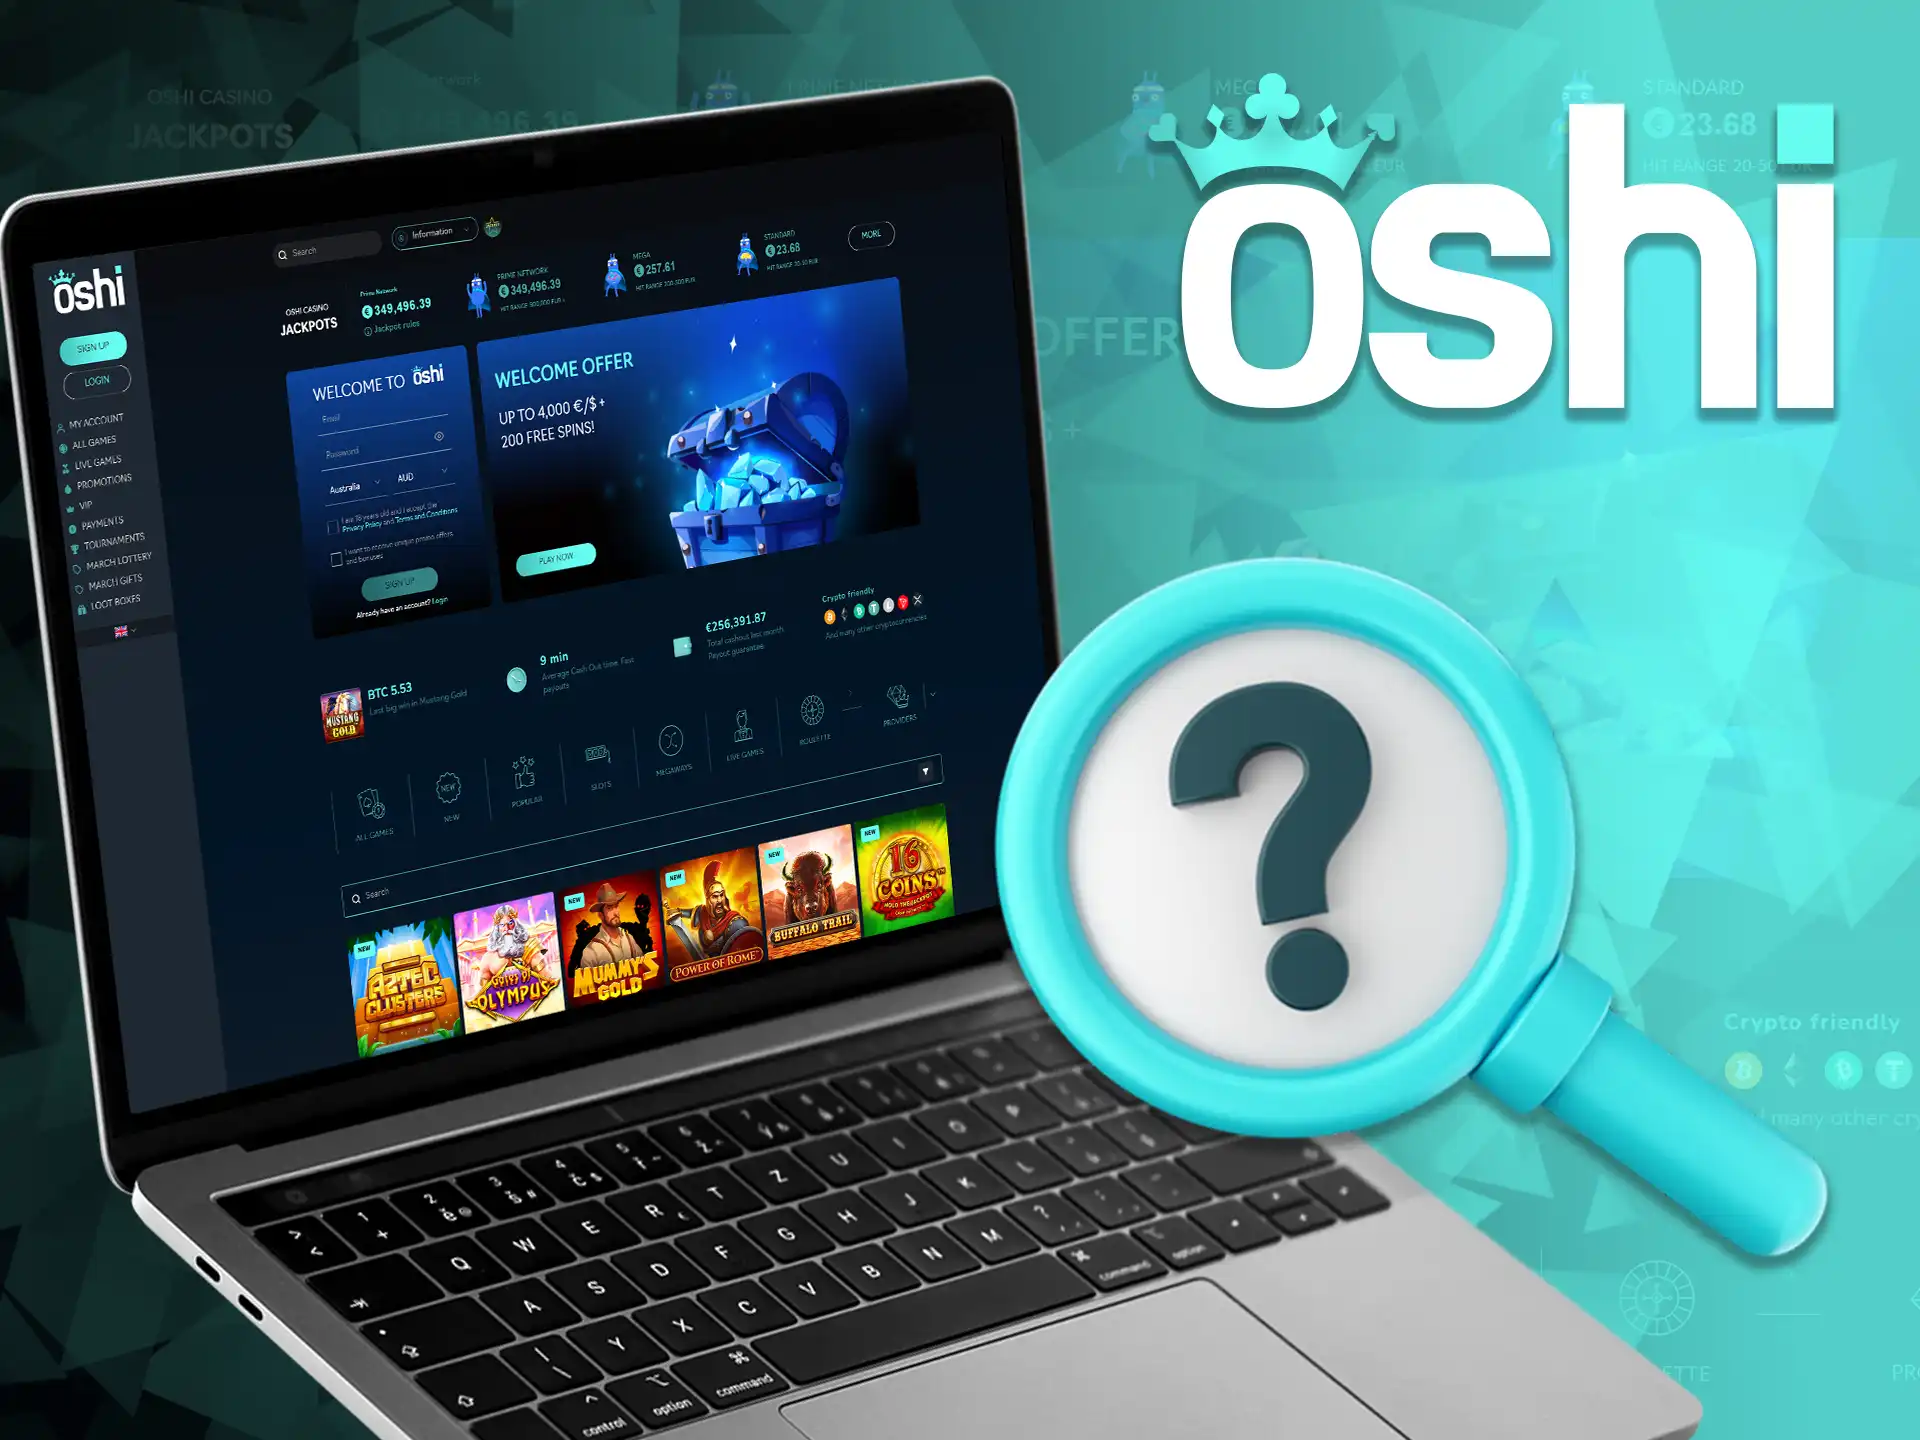 Here is a step-by-step guide to help you start playing at Oshi Online Casino.